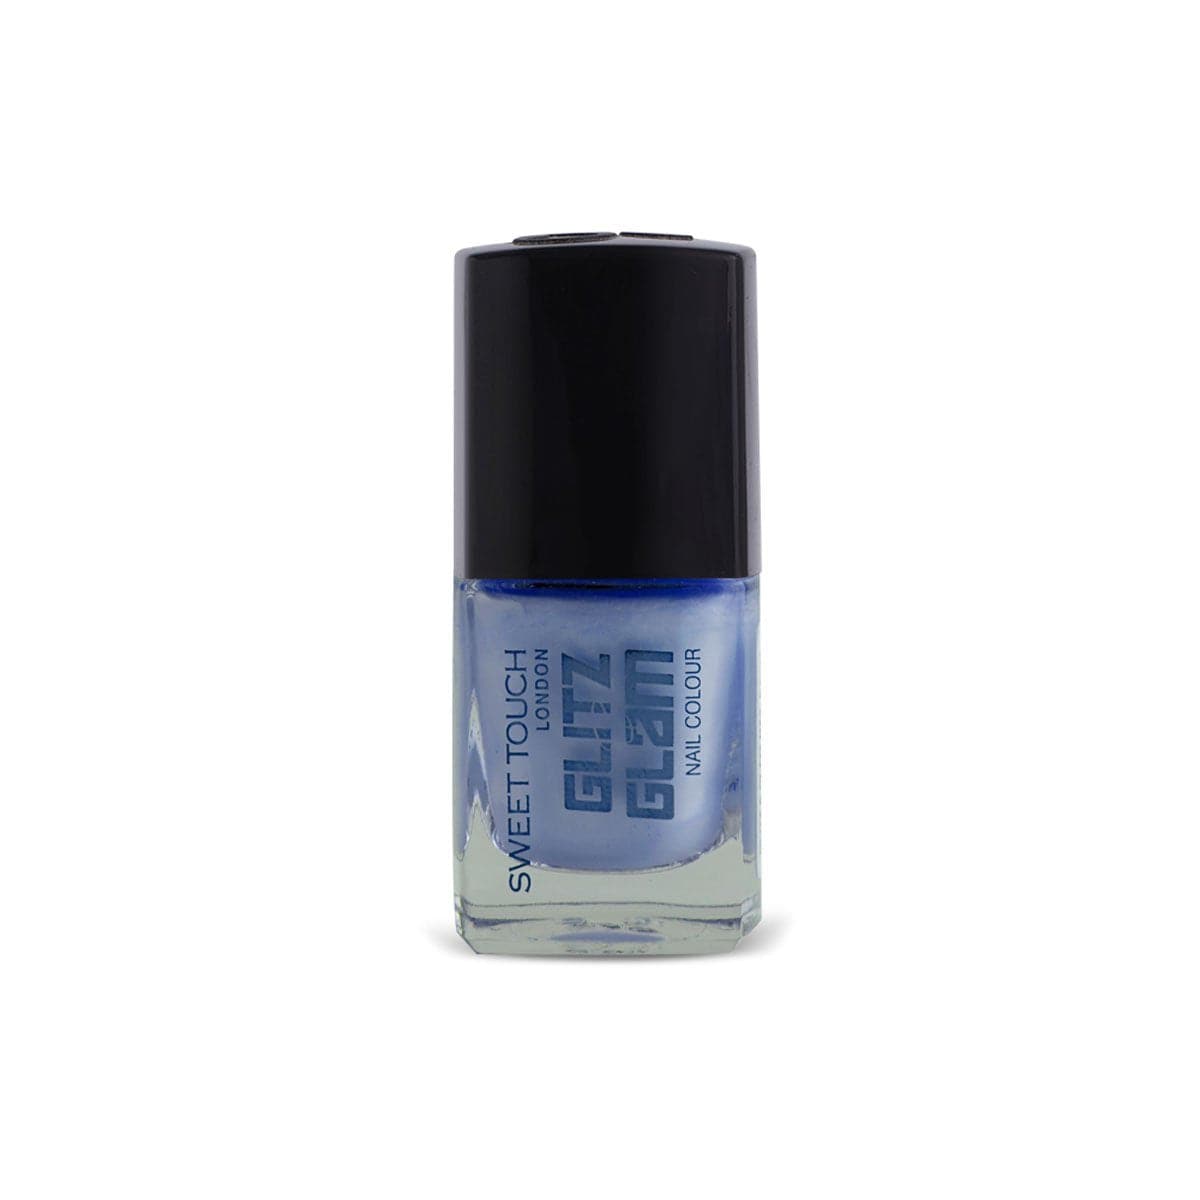 ST London Glitz & Glam Nail Paint - St256 Electra - Premium Health & Beauty from St London - Just Rs 430.00! Shop now at Cozmetica